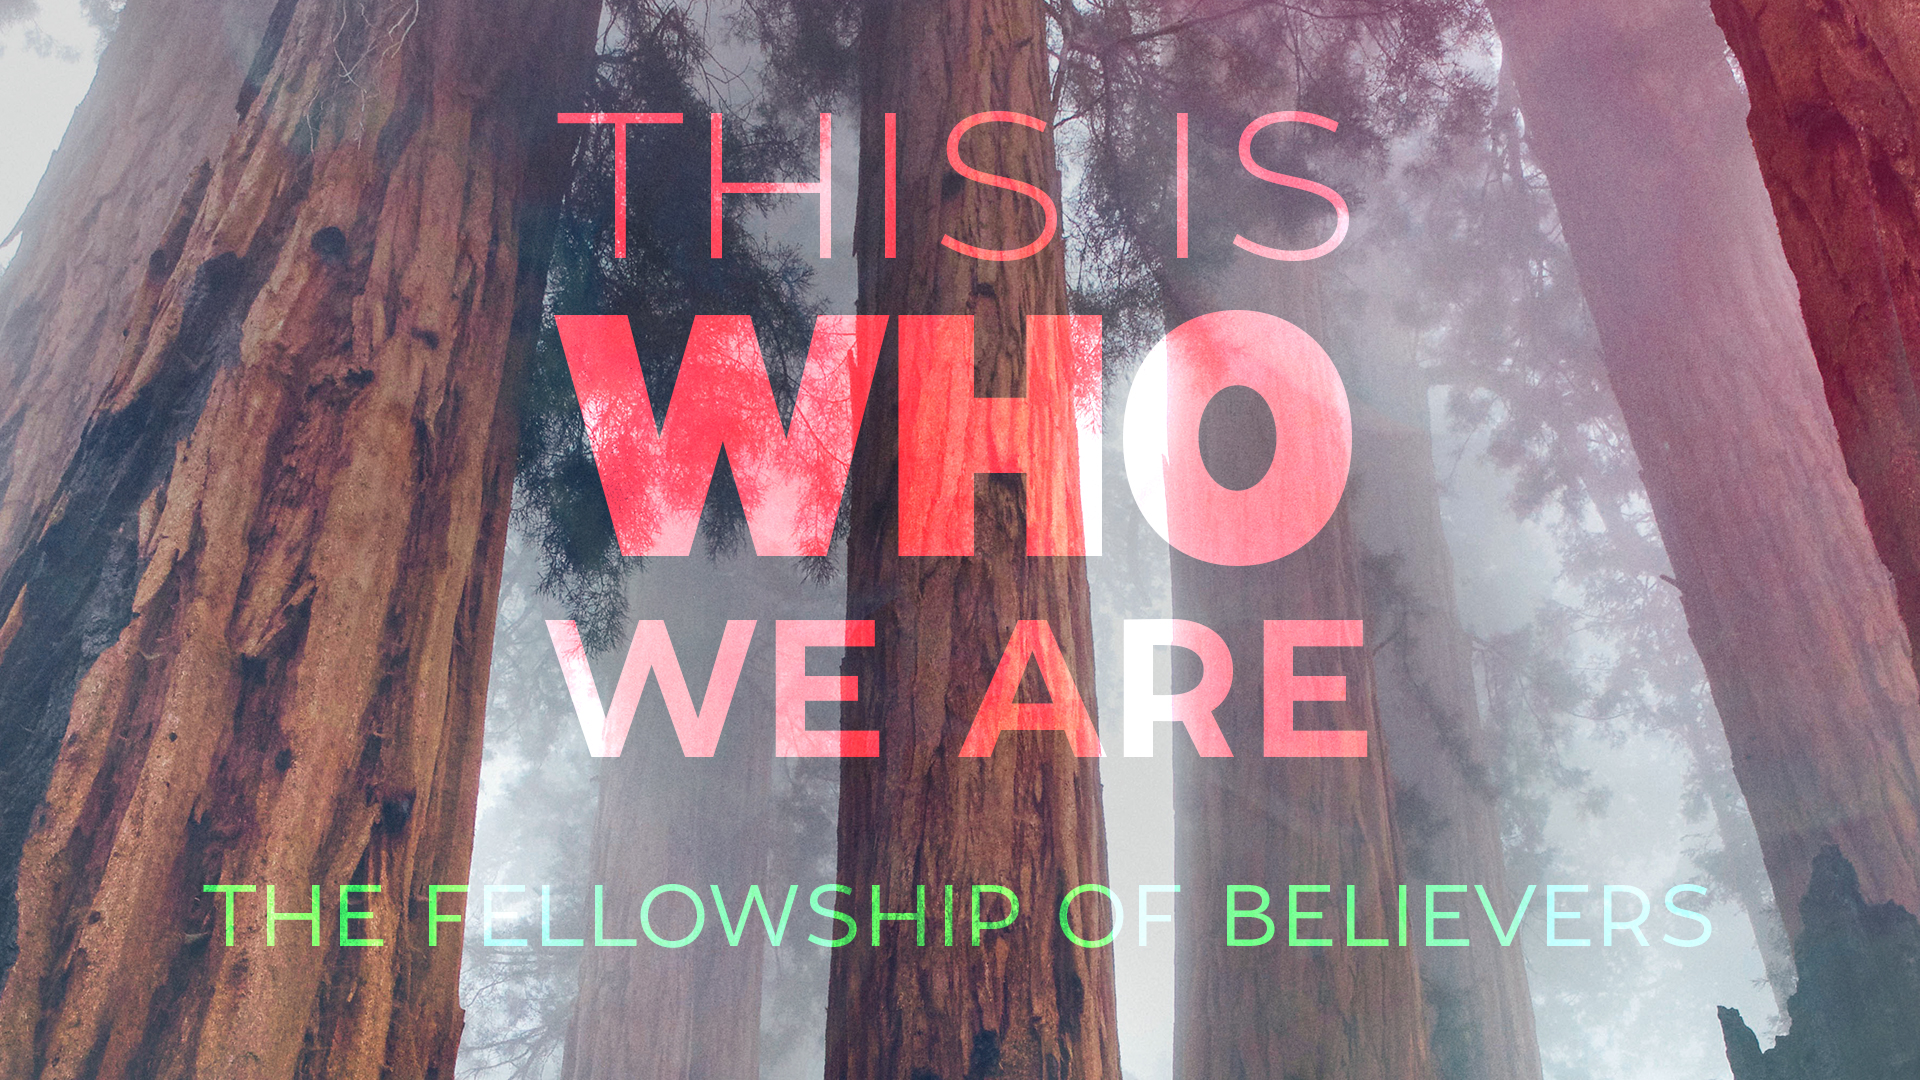 The Fellowship of Believers